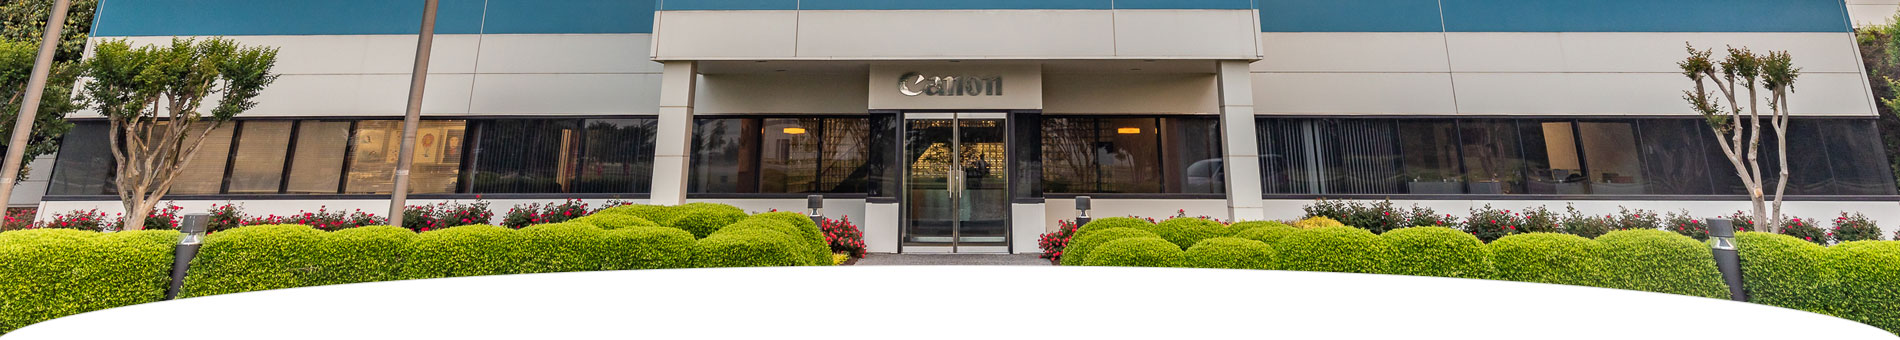 Image of the front face of the Canon Virginia Office building front door with bushes nearby